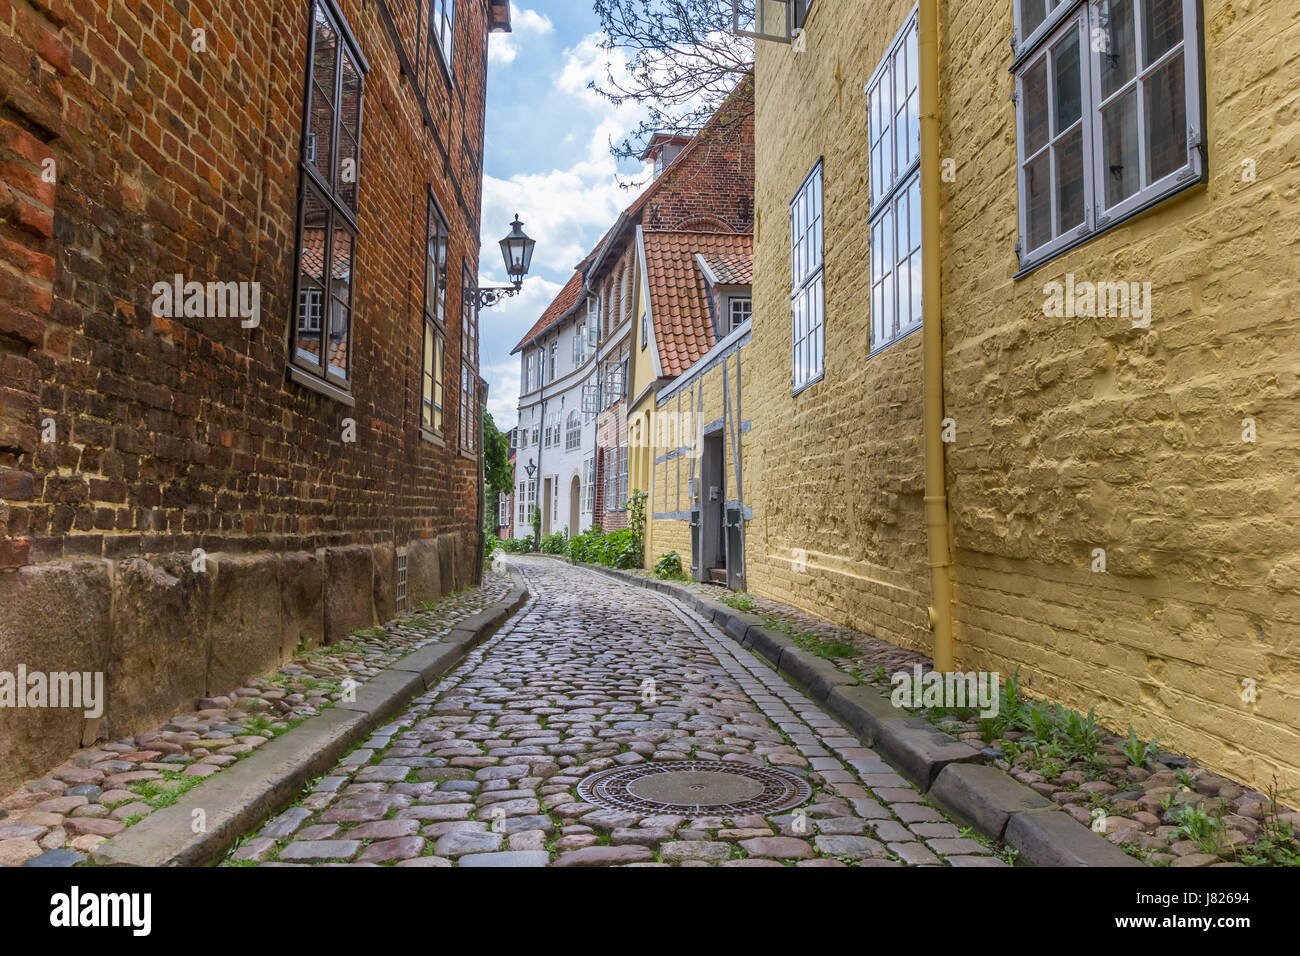 Cobblestoned street with colorful houses in Luneburg, Germany Stock Photo